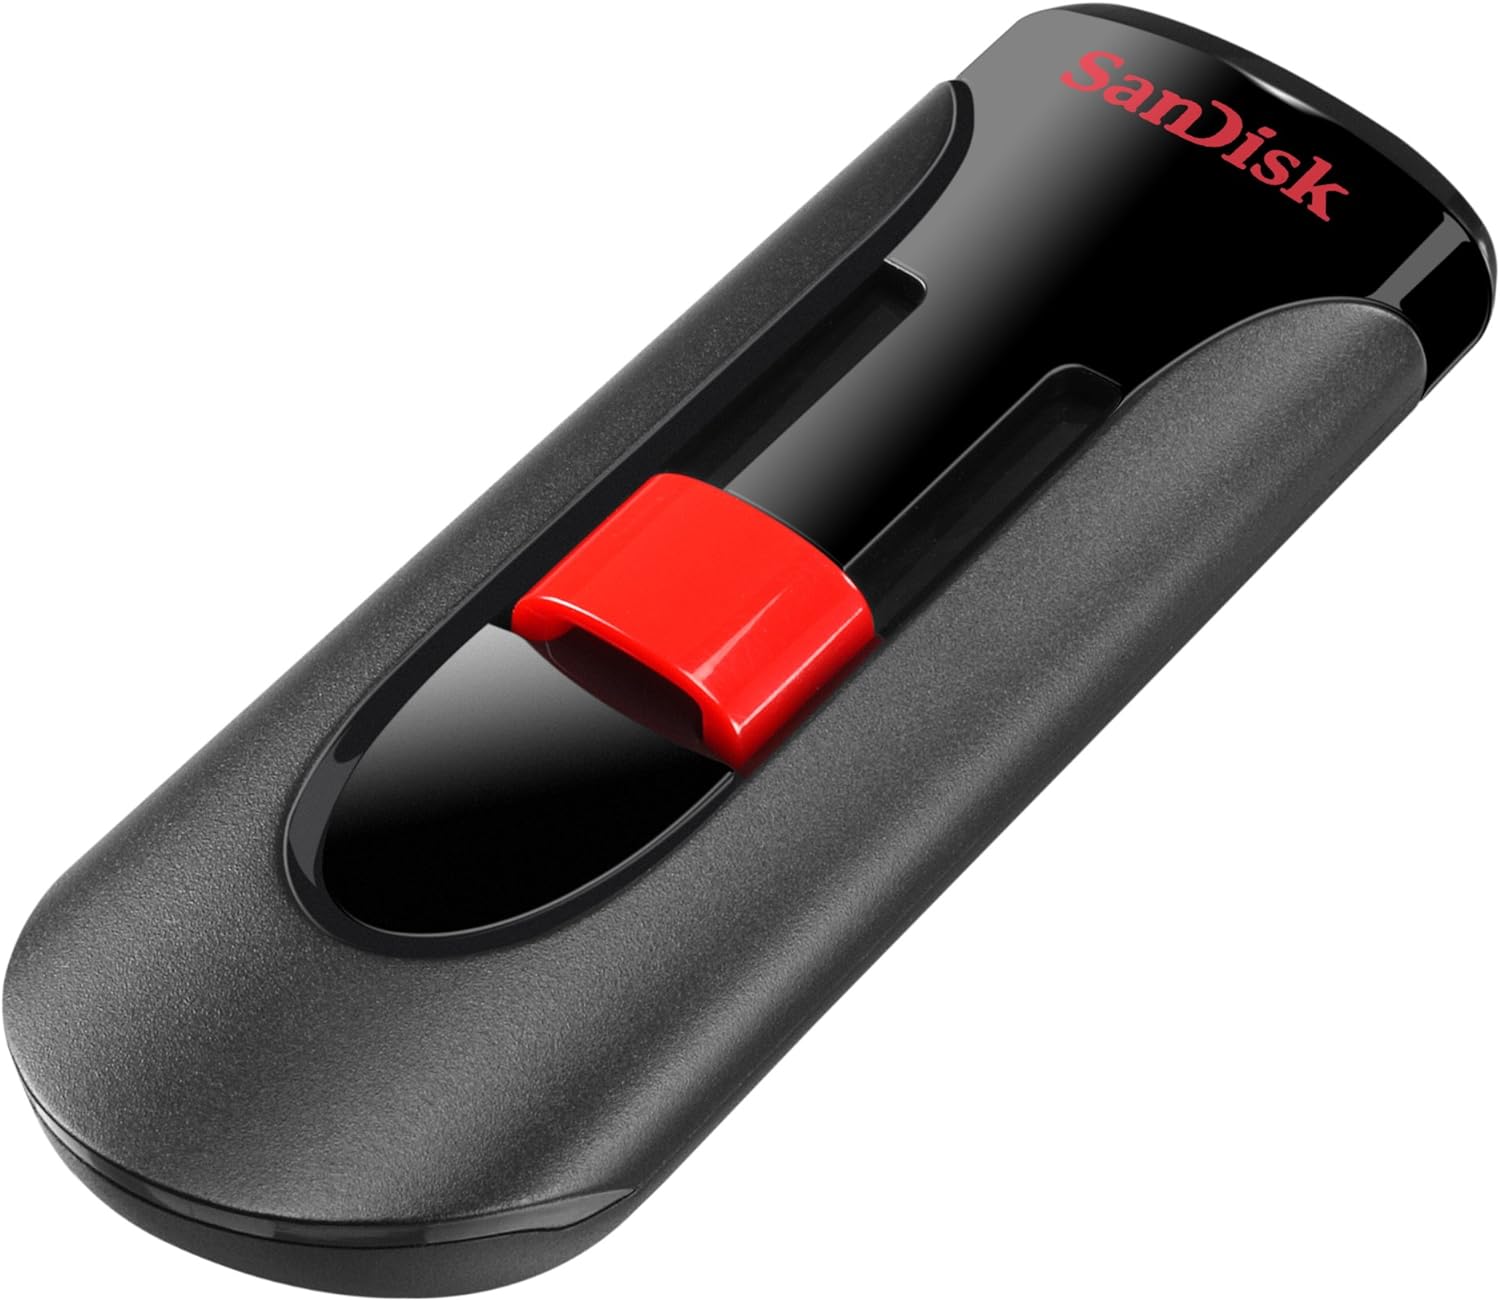 SanDisk 256GB Cruzer Glide USB 2.0 Flash Drive - A Reliable and Secure Storage Solution